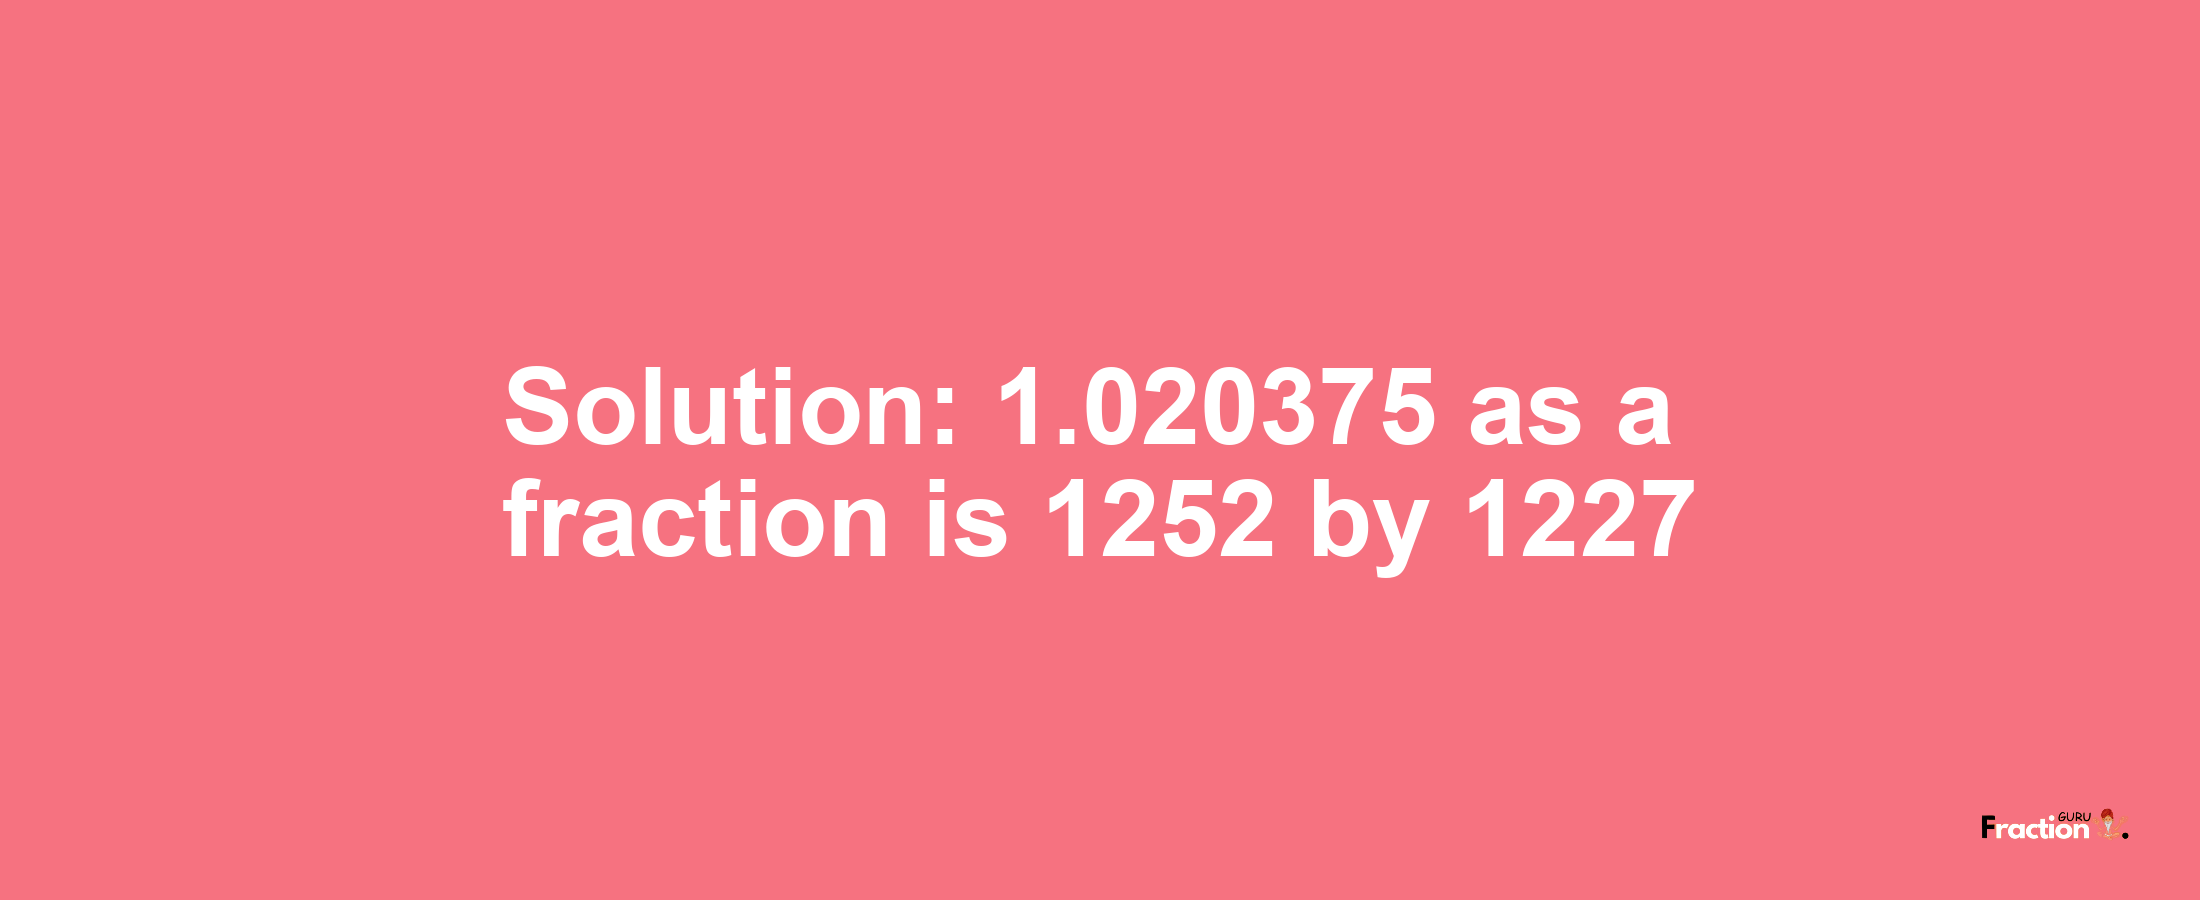 Solution:1.020375 as a fraction is 1252/1227